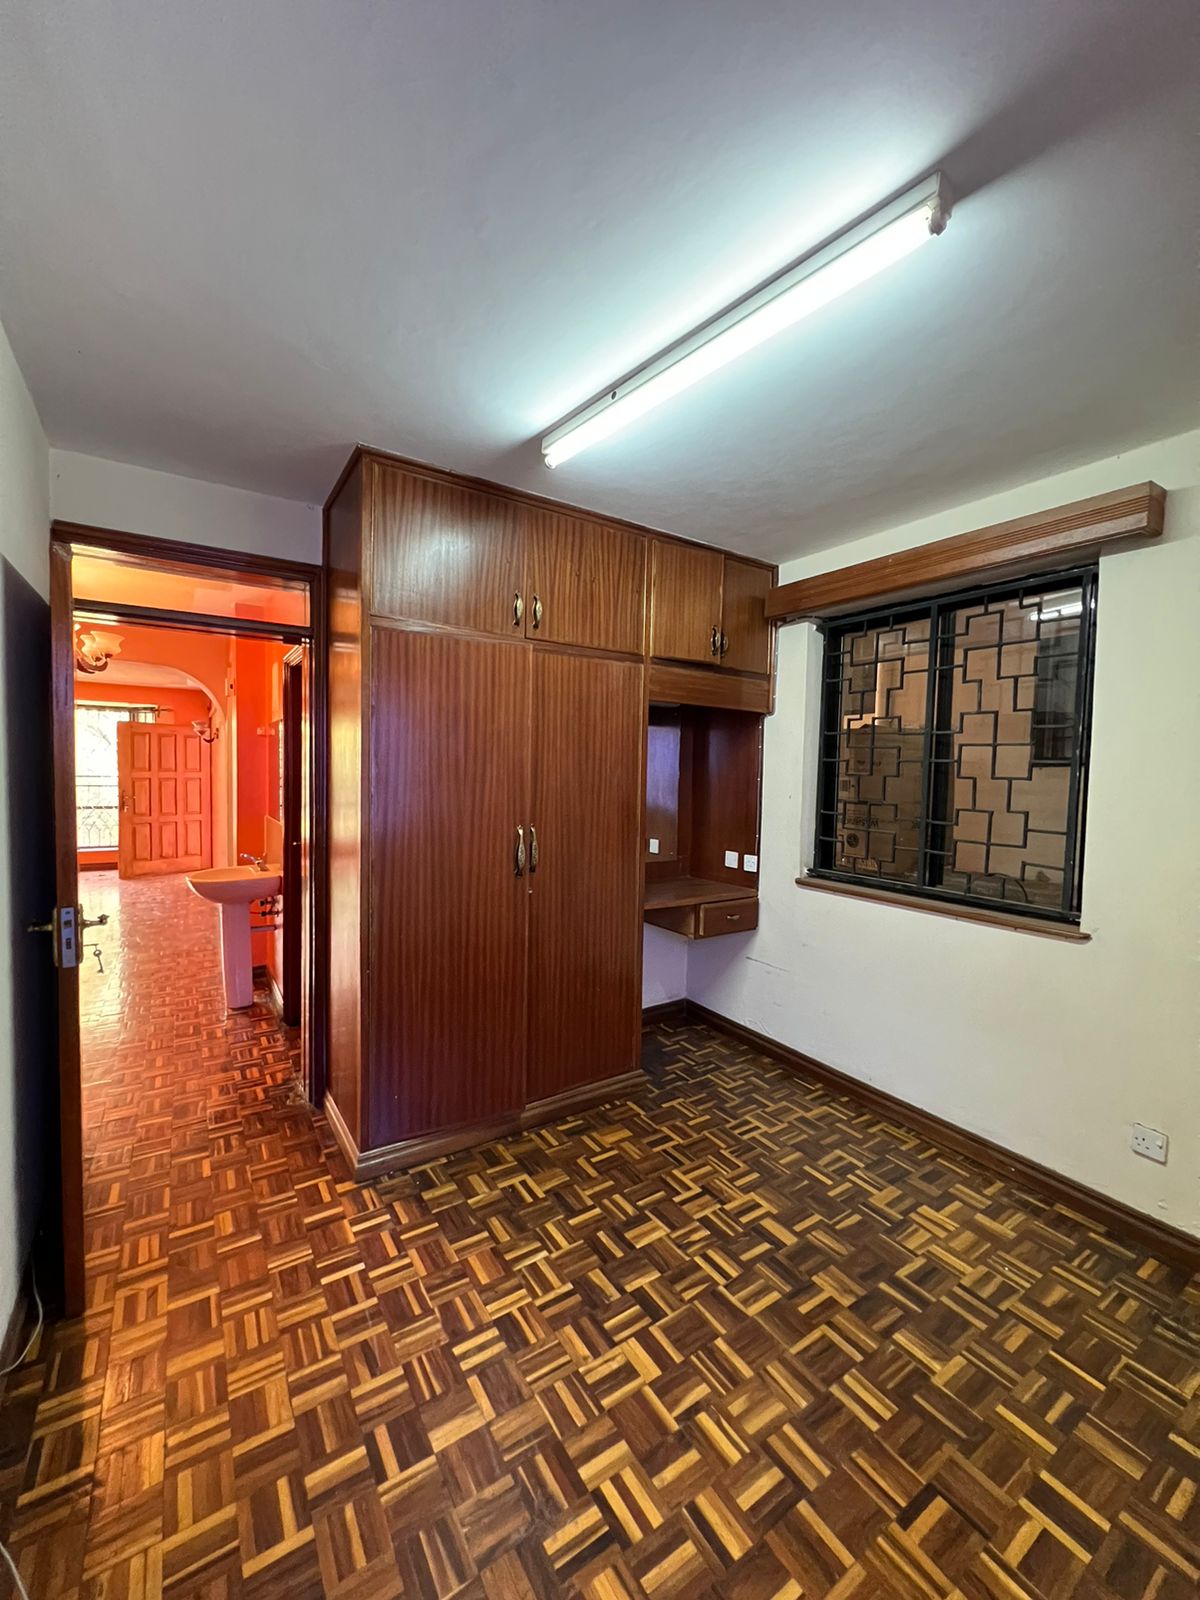 4 bedroom townhouse plus dsq to let in the heart of lavington area. Musilli Homes